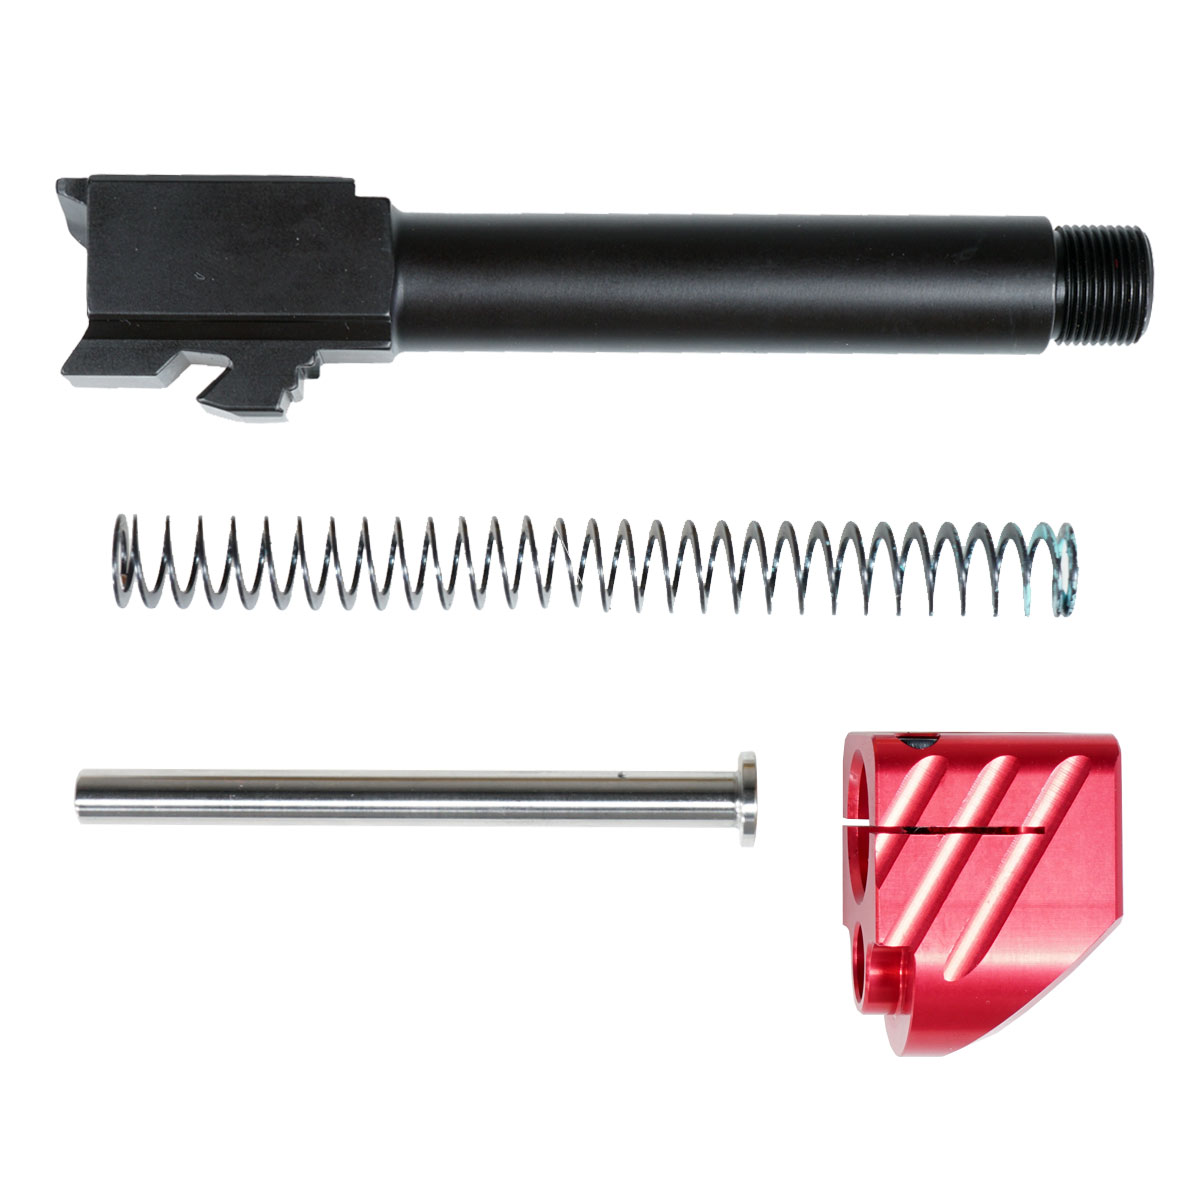 Upgrade Your Glock Kit: Davidson Defense Glock Compensator 6061 Aluminum, Anodized Type 2 Red Single port comp 1/2x28 with clamping set screws  + ELD Performance Match Grade 9mm Glock 19 Compatible Nitride Melonite 1-16T Threaded Barrel